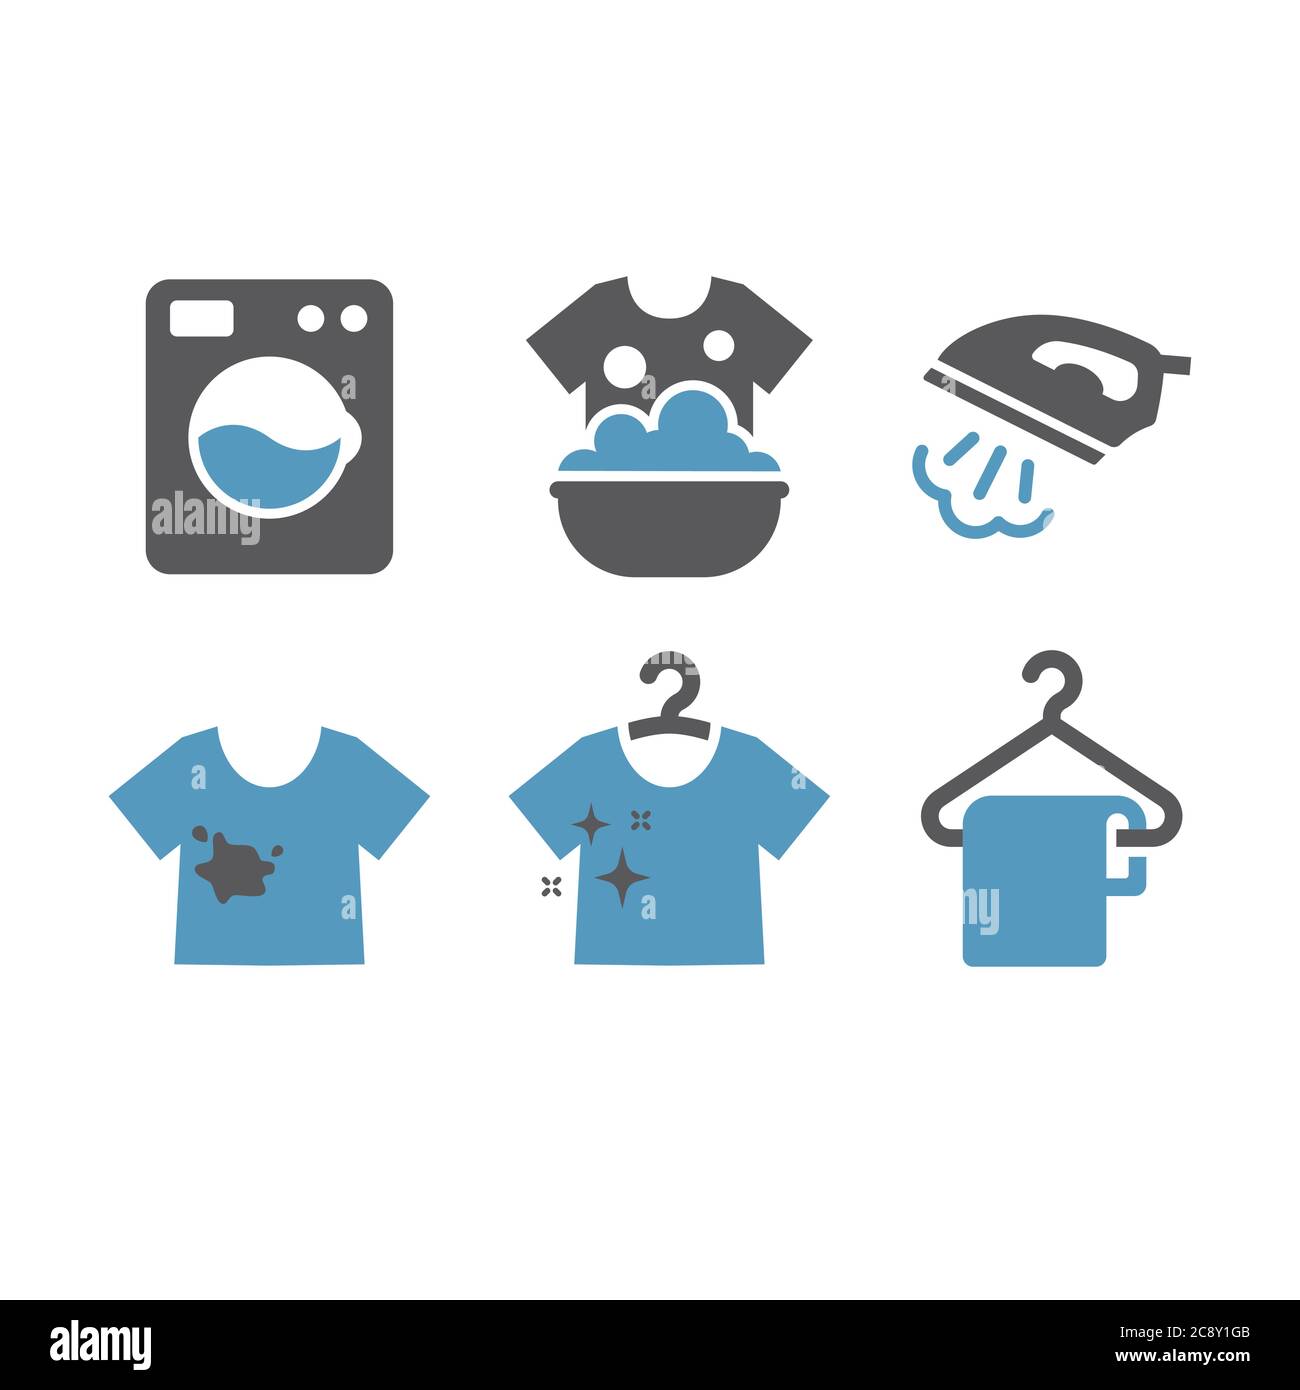 icons, laundry, iron, machine, service, washing, cleaning, dry, pictogram, glyph, icon, ironing, steam, blouse, hanger, hand, t-shirt, t shirt, black, Stock Vector